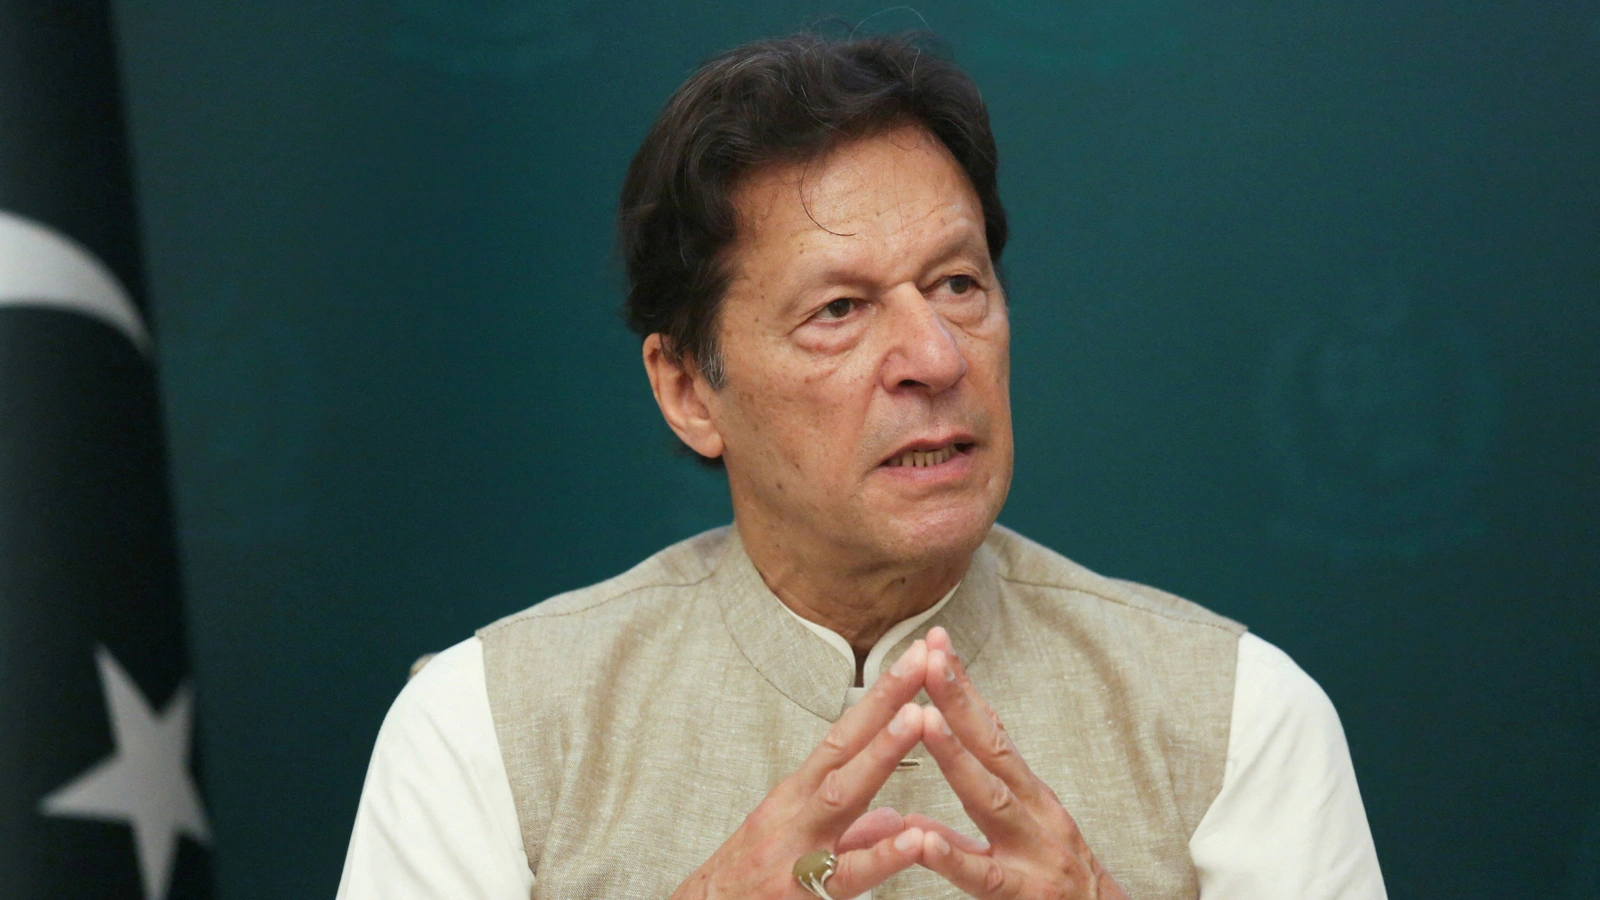 Imran Khan says Pak descending into Banana Republic after close-aide arrested on sedition charges